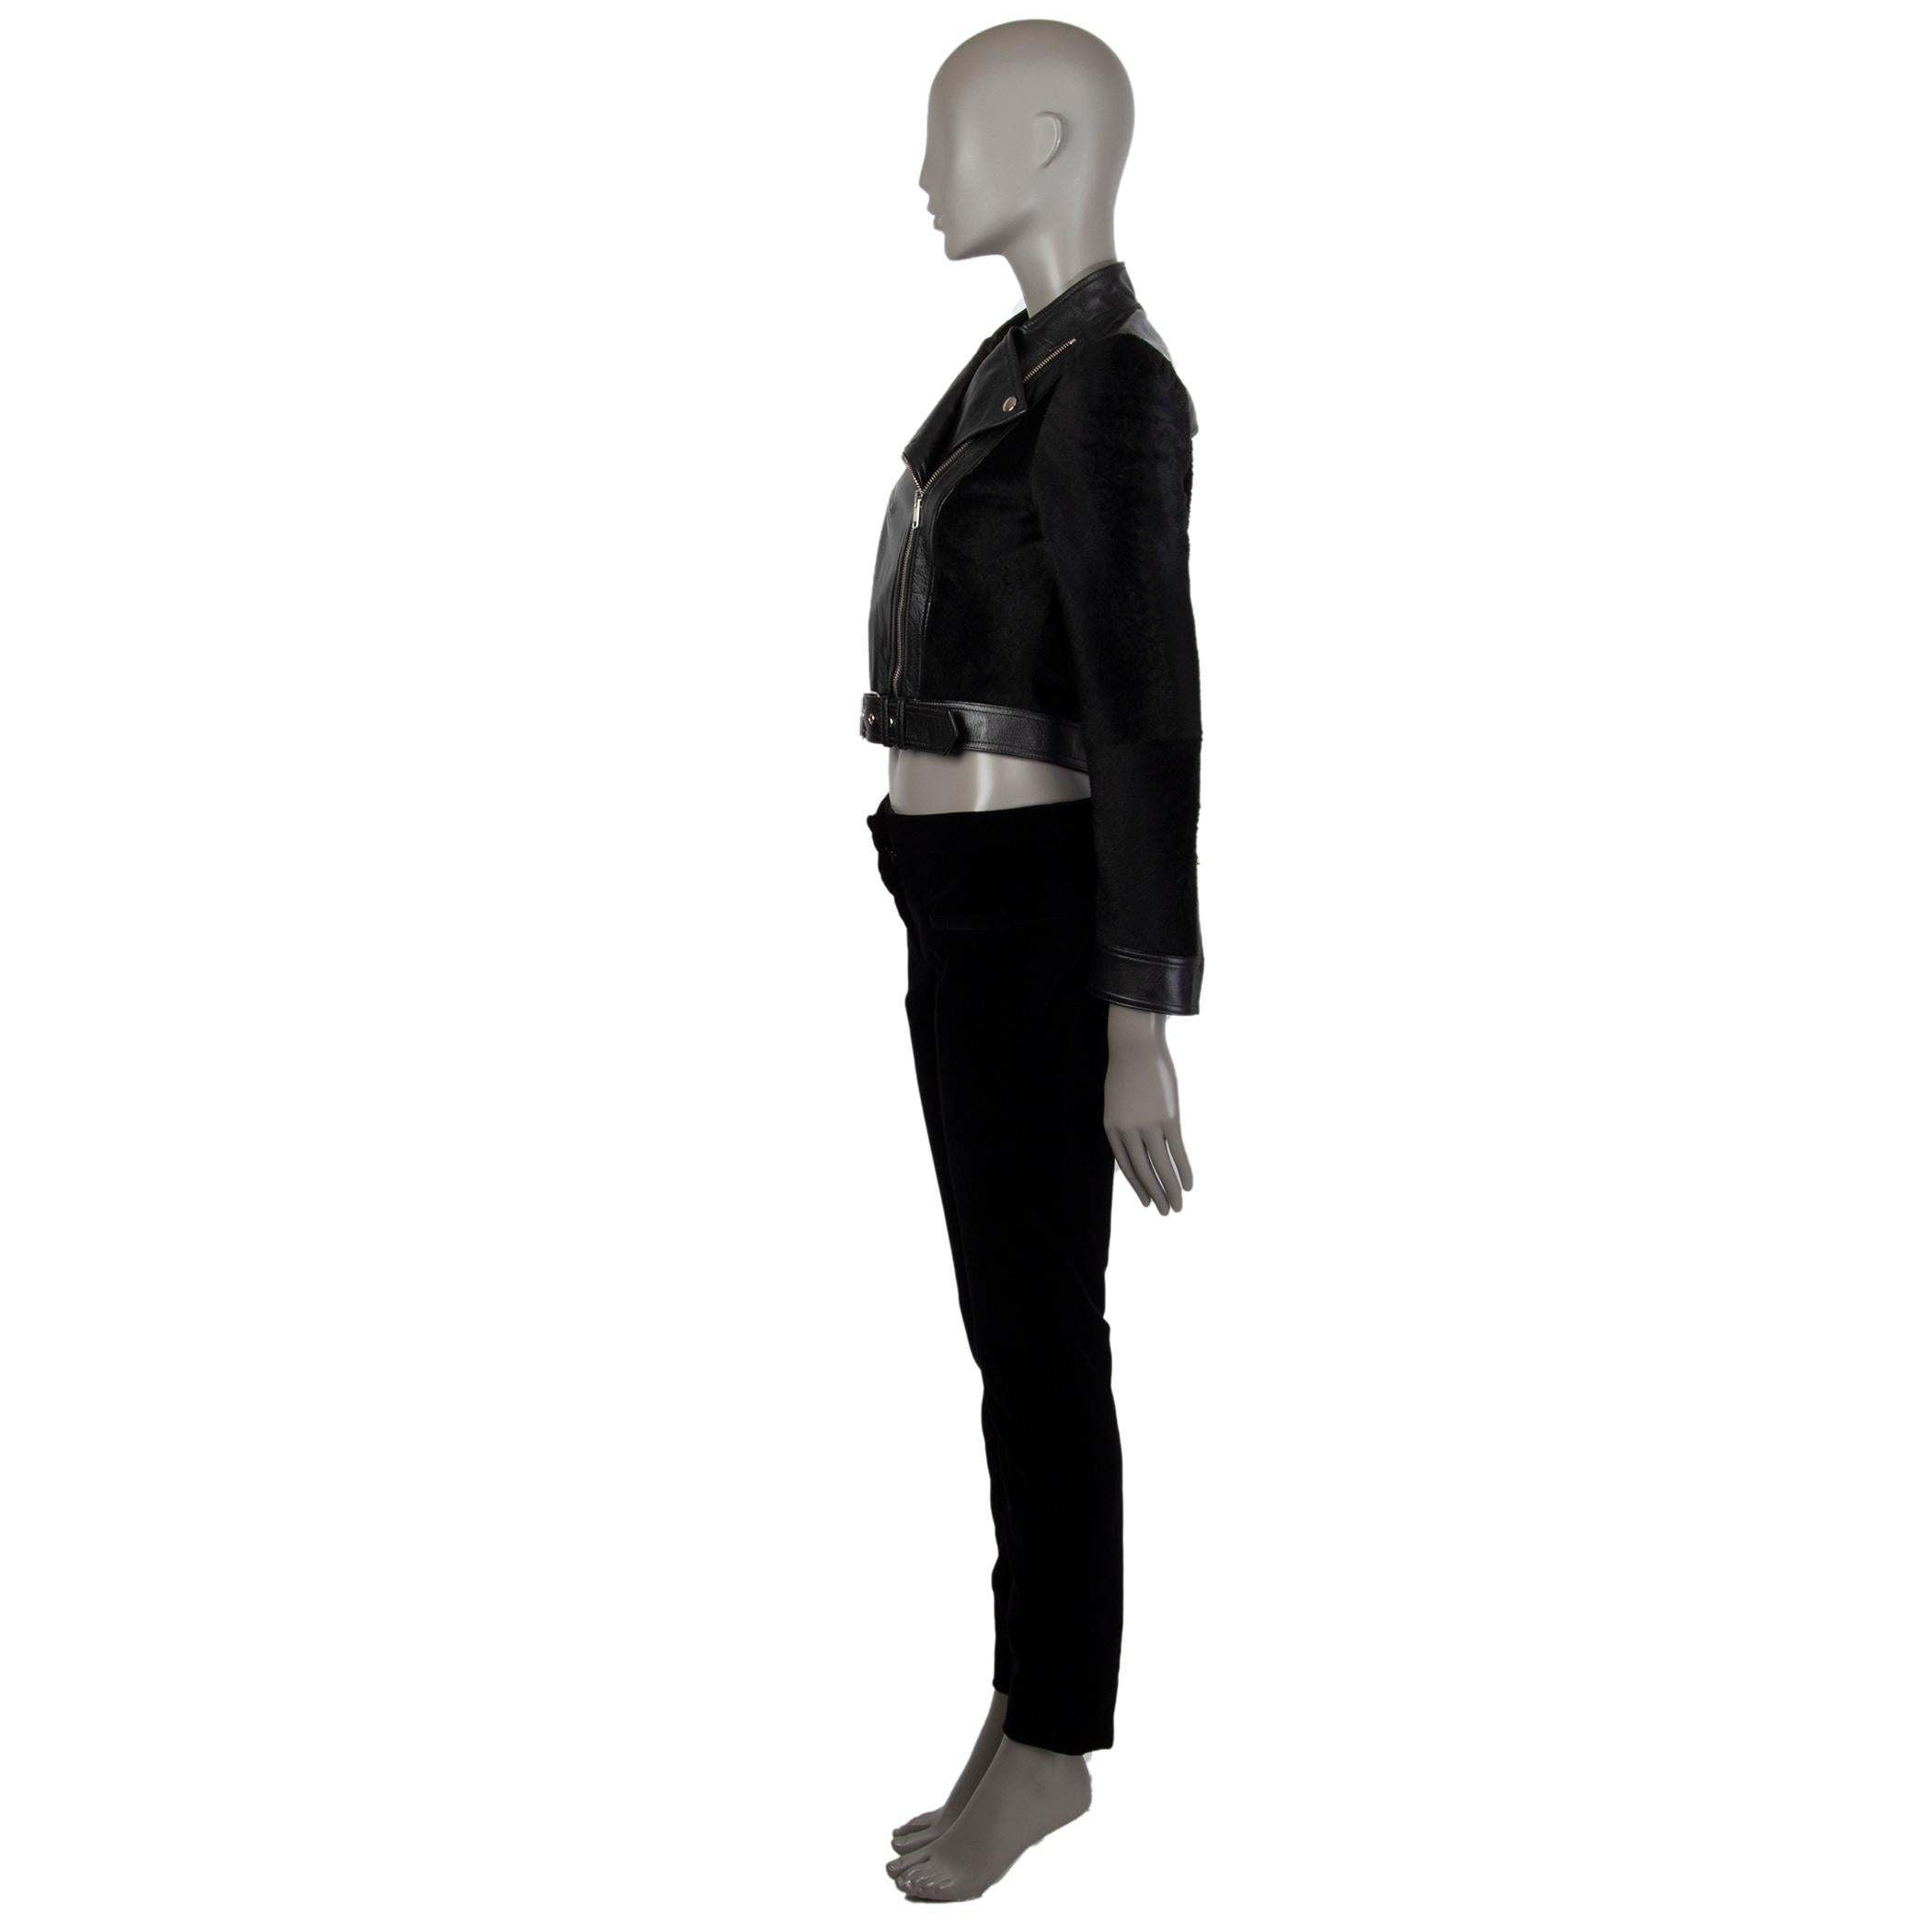 Alexander McQueen biker jacket in black shearling and leather with a frontal asymmetrical zipper pocket. Has a band collar that can be worn open with snap buttons. Closes on the front with a silver tone zipper and buckles with an attached belt on